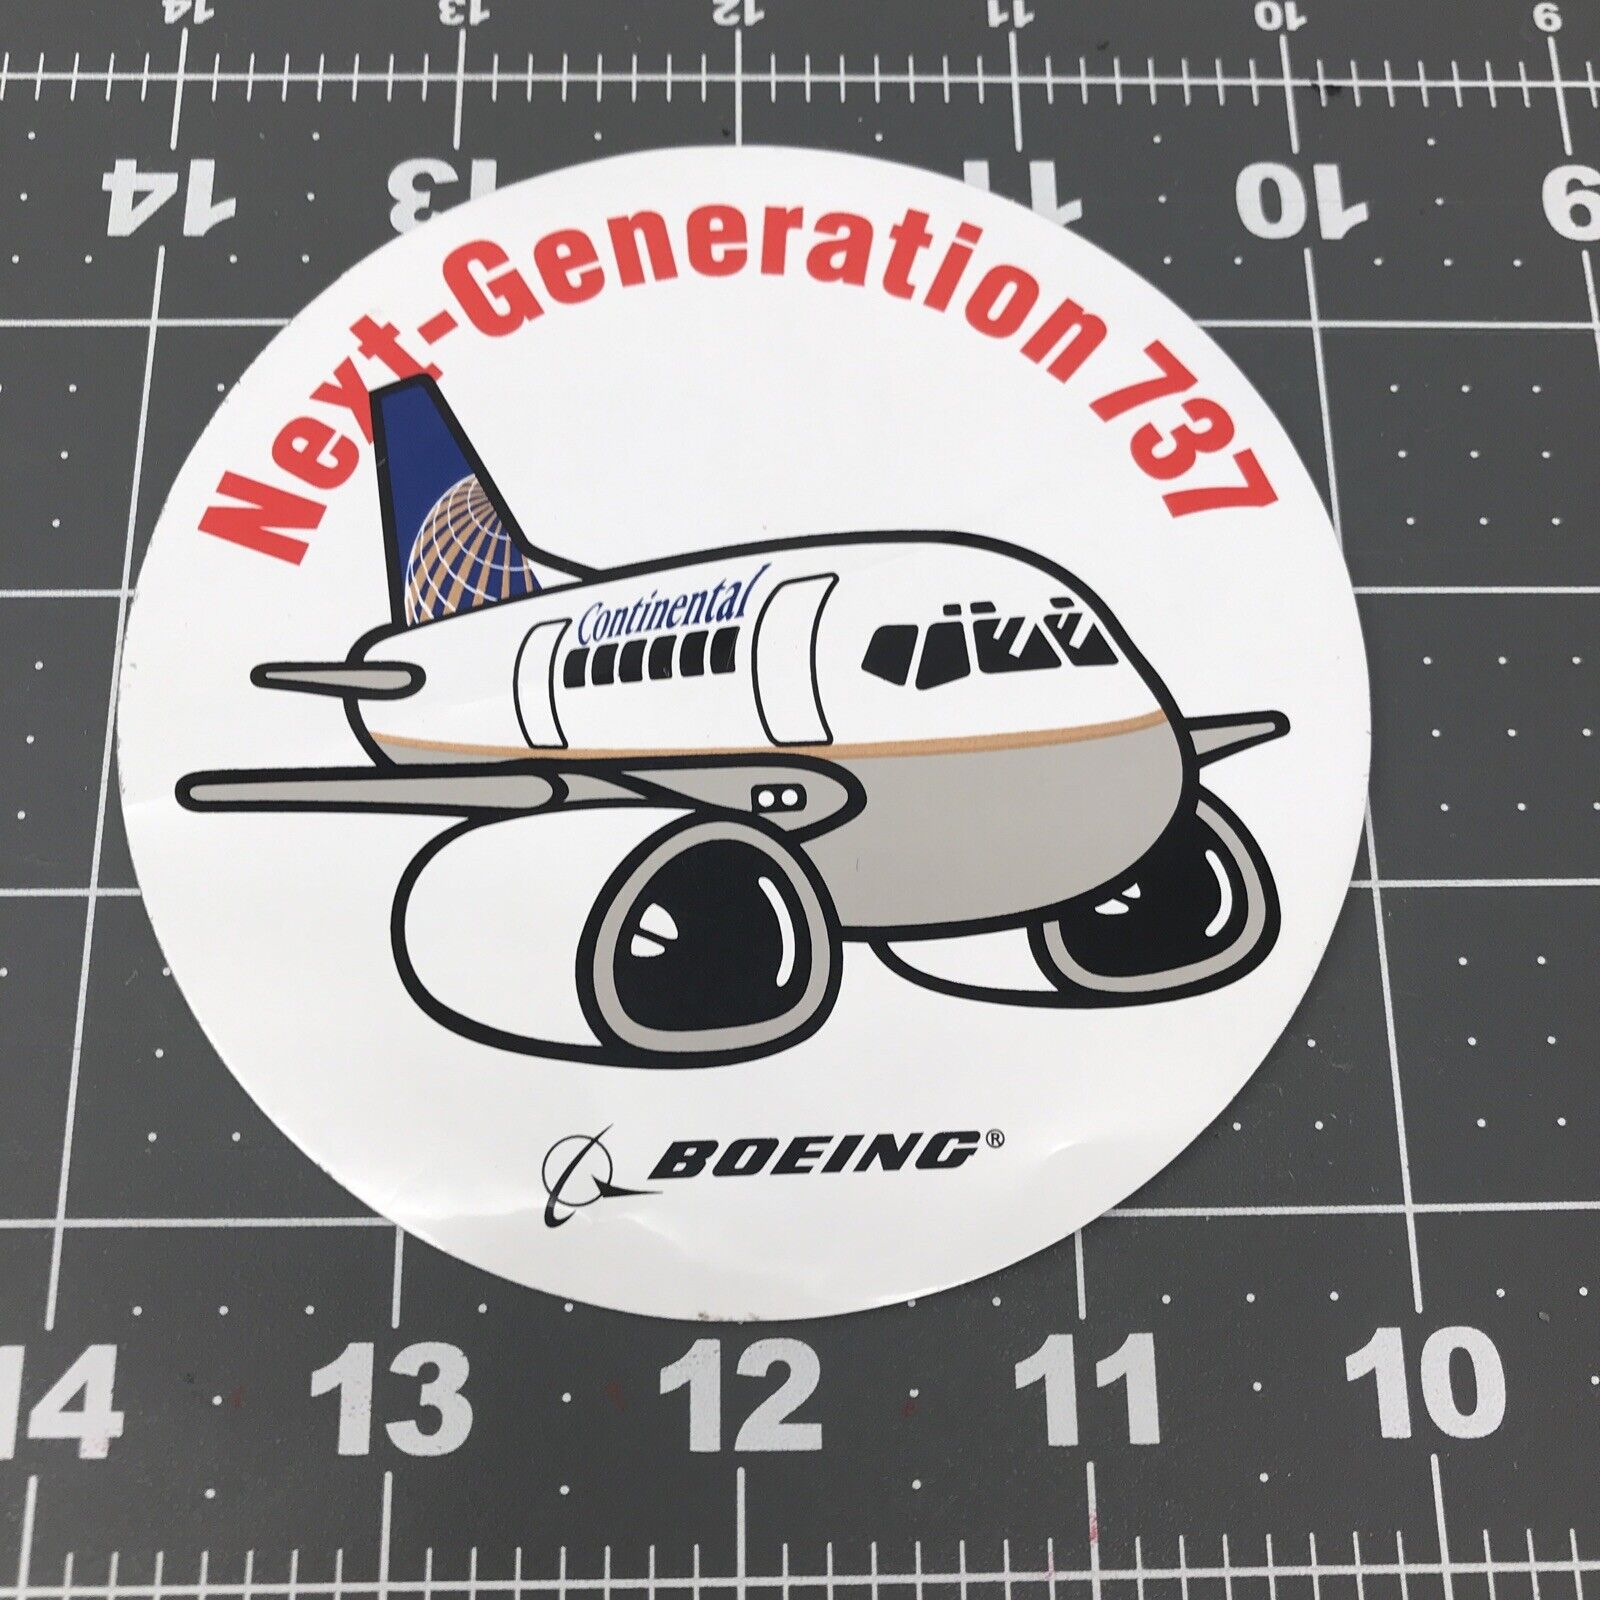 VINTAGE Rare BOEING 737 Next-Generation AIRCRAFT Jet COLLECTIBLE STICKER DECAL